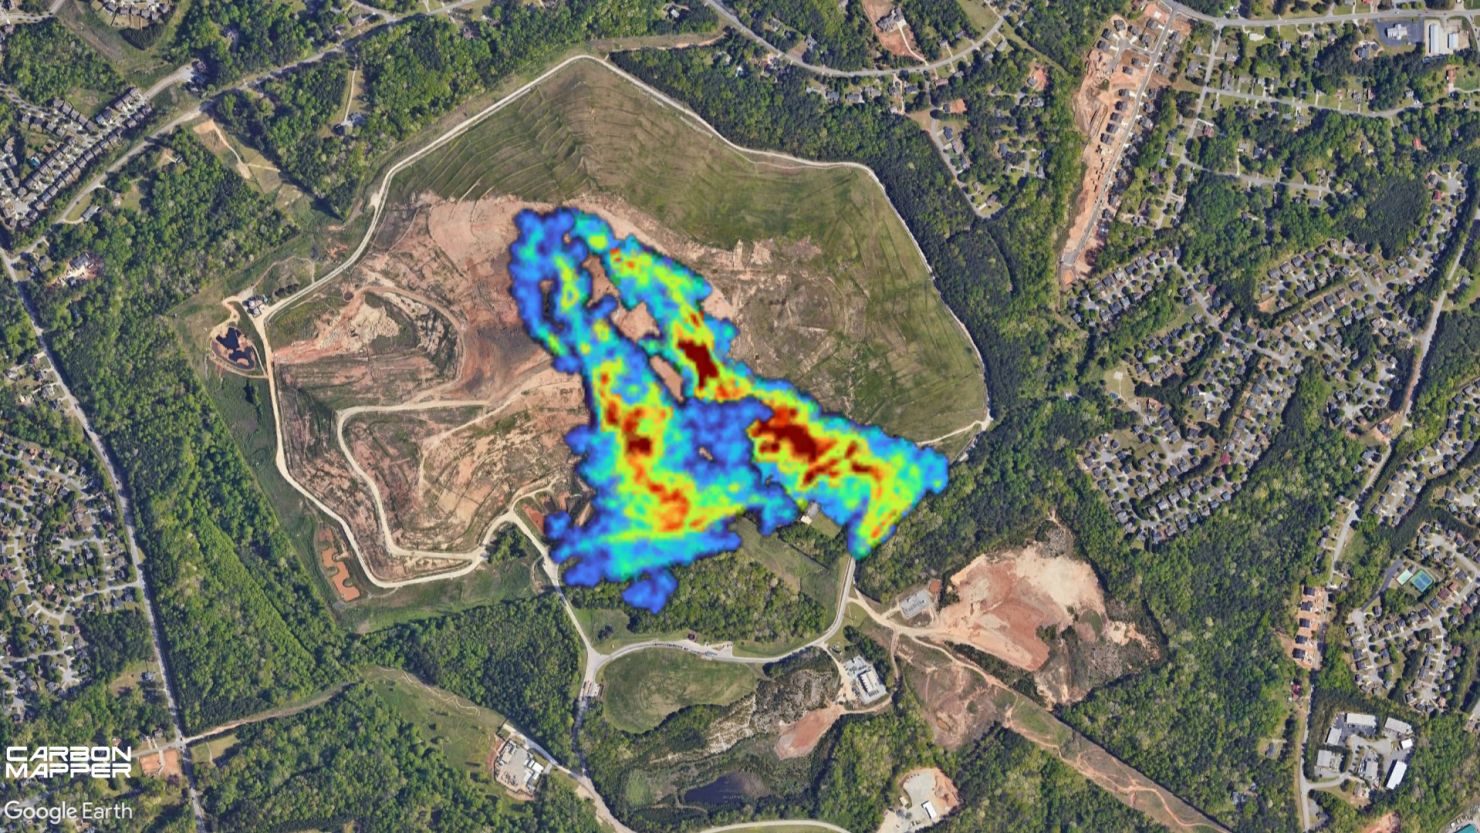 Methane plumes observed by Carbon Mapper during aerial surveys at a landfill in Georgia.